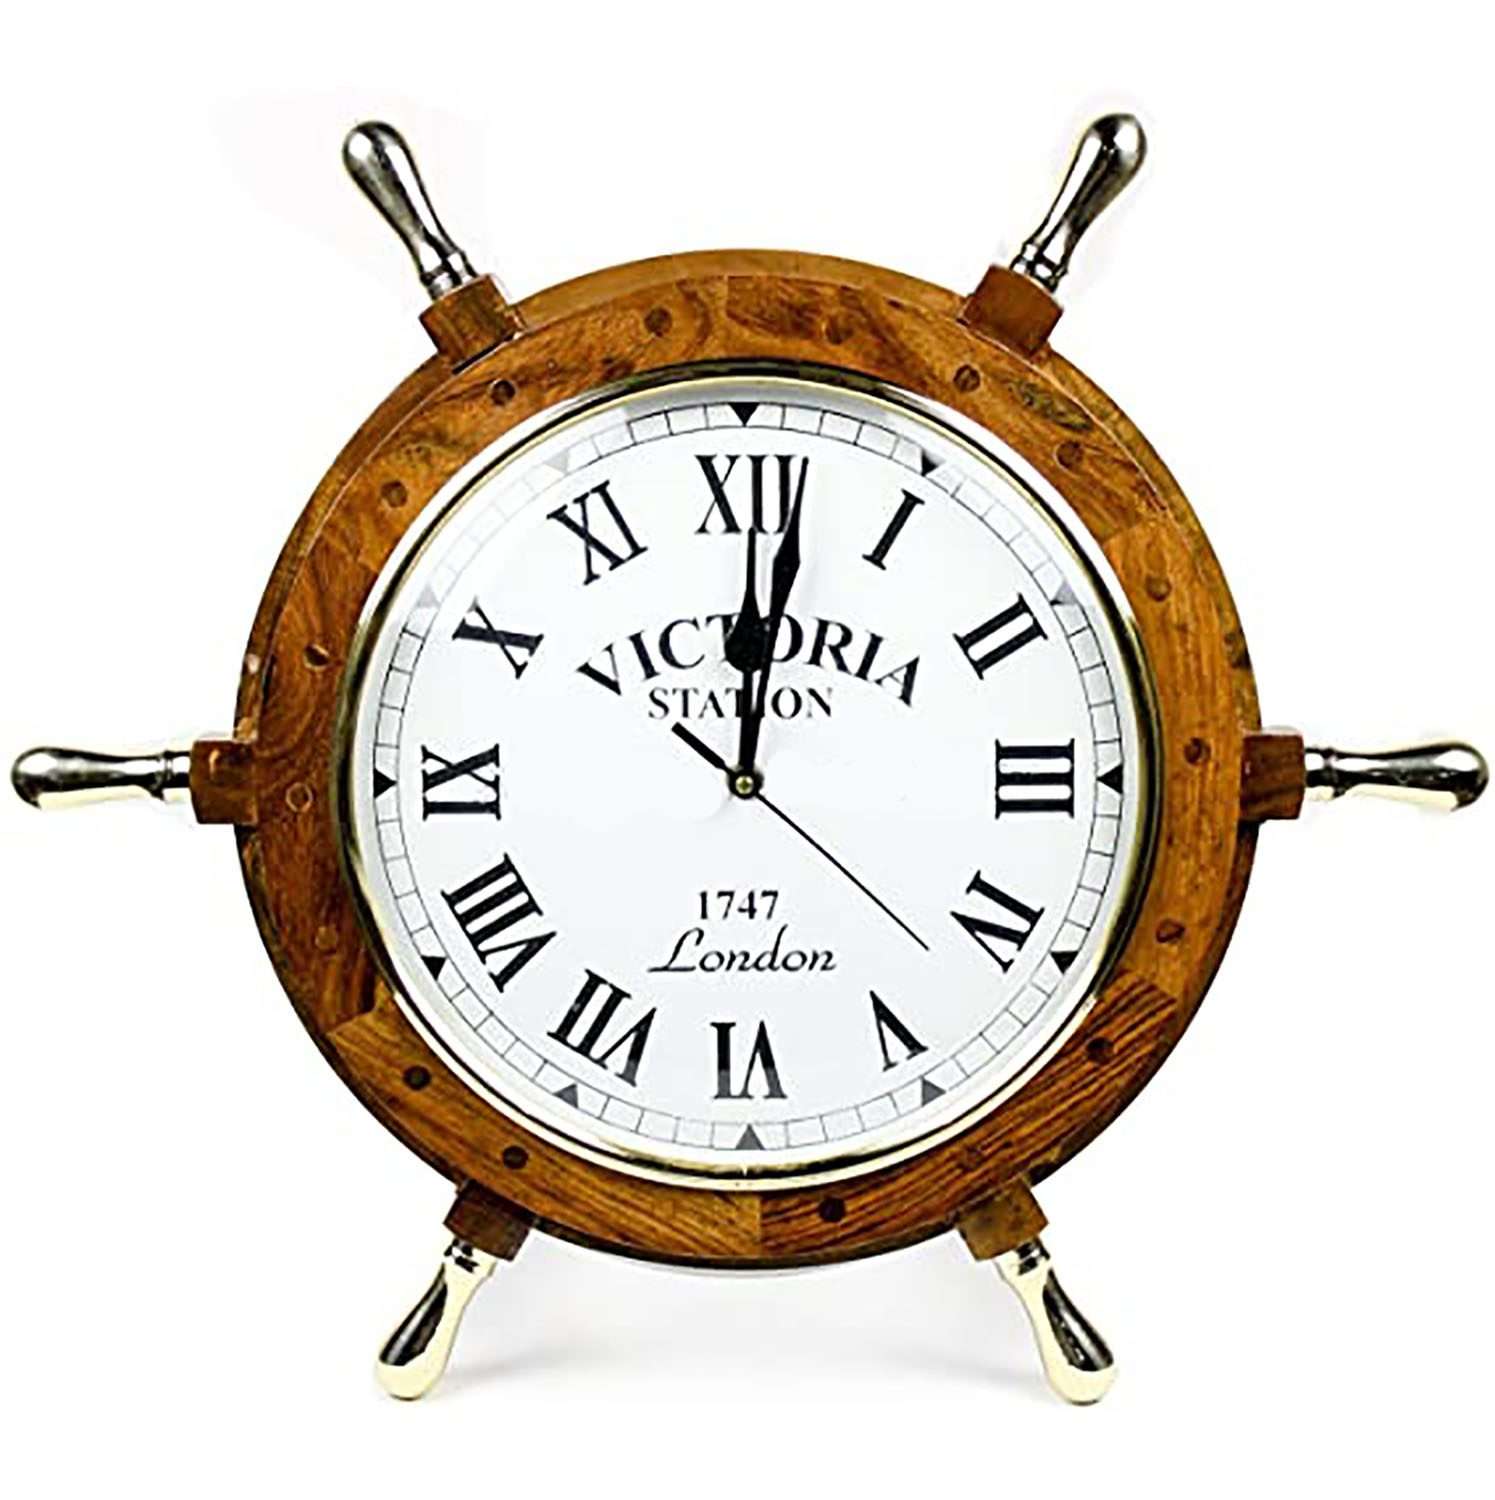 Roman Handcrafted Wooden Nautical Ship Wheel Wall Clock with Solid Brass Handles